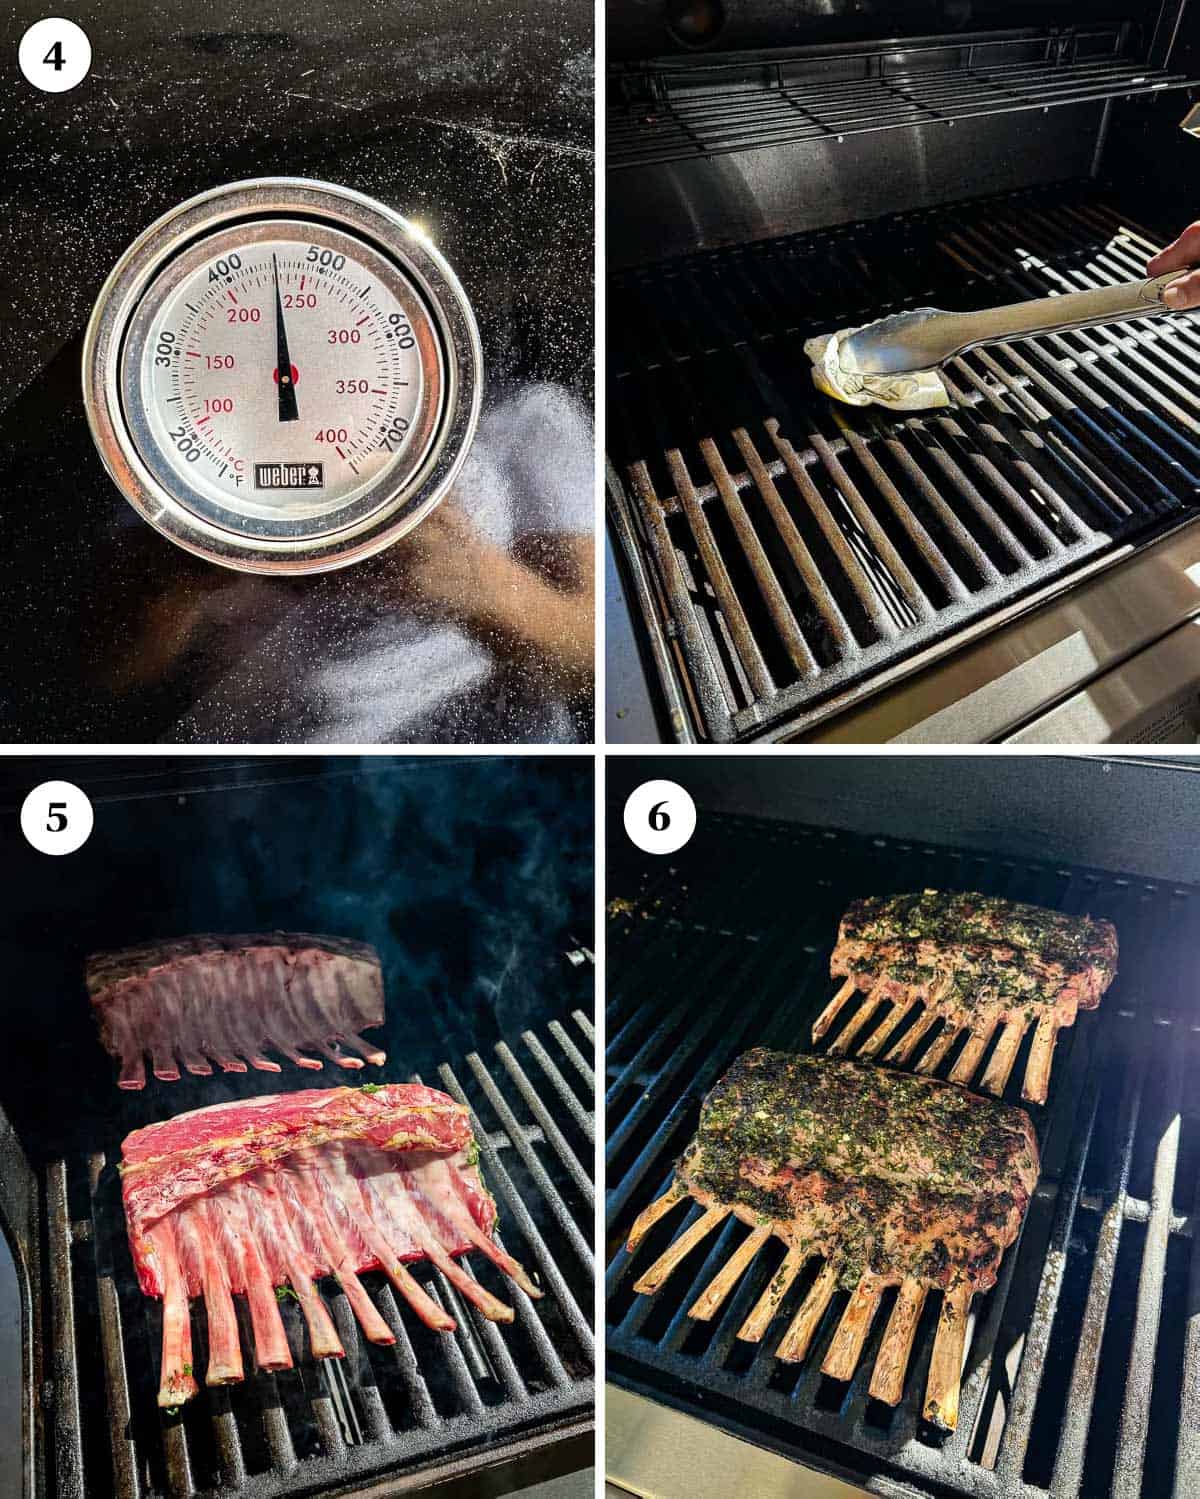 A collage of images showing how to barbecue rack of lamb.